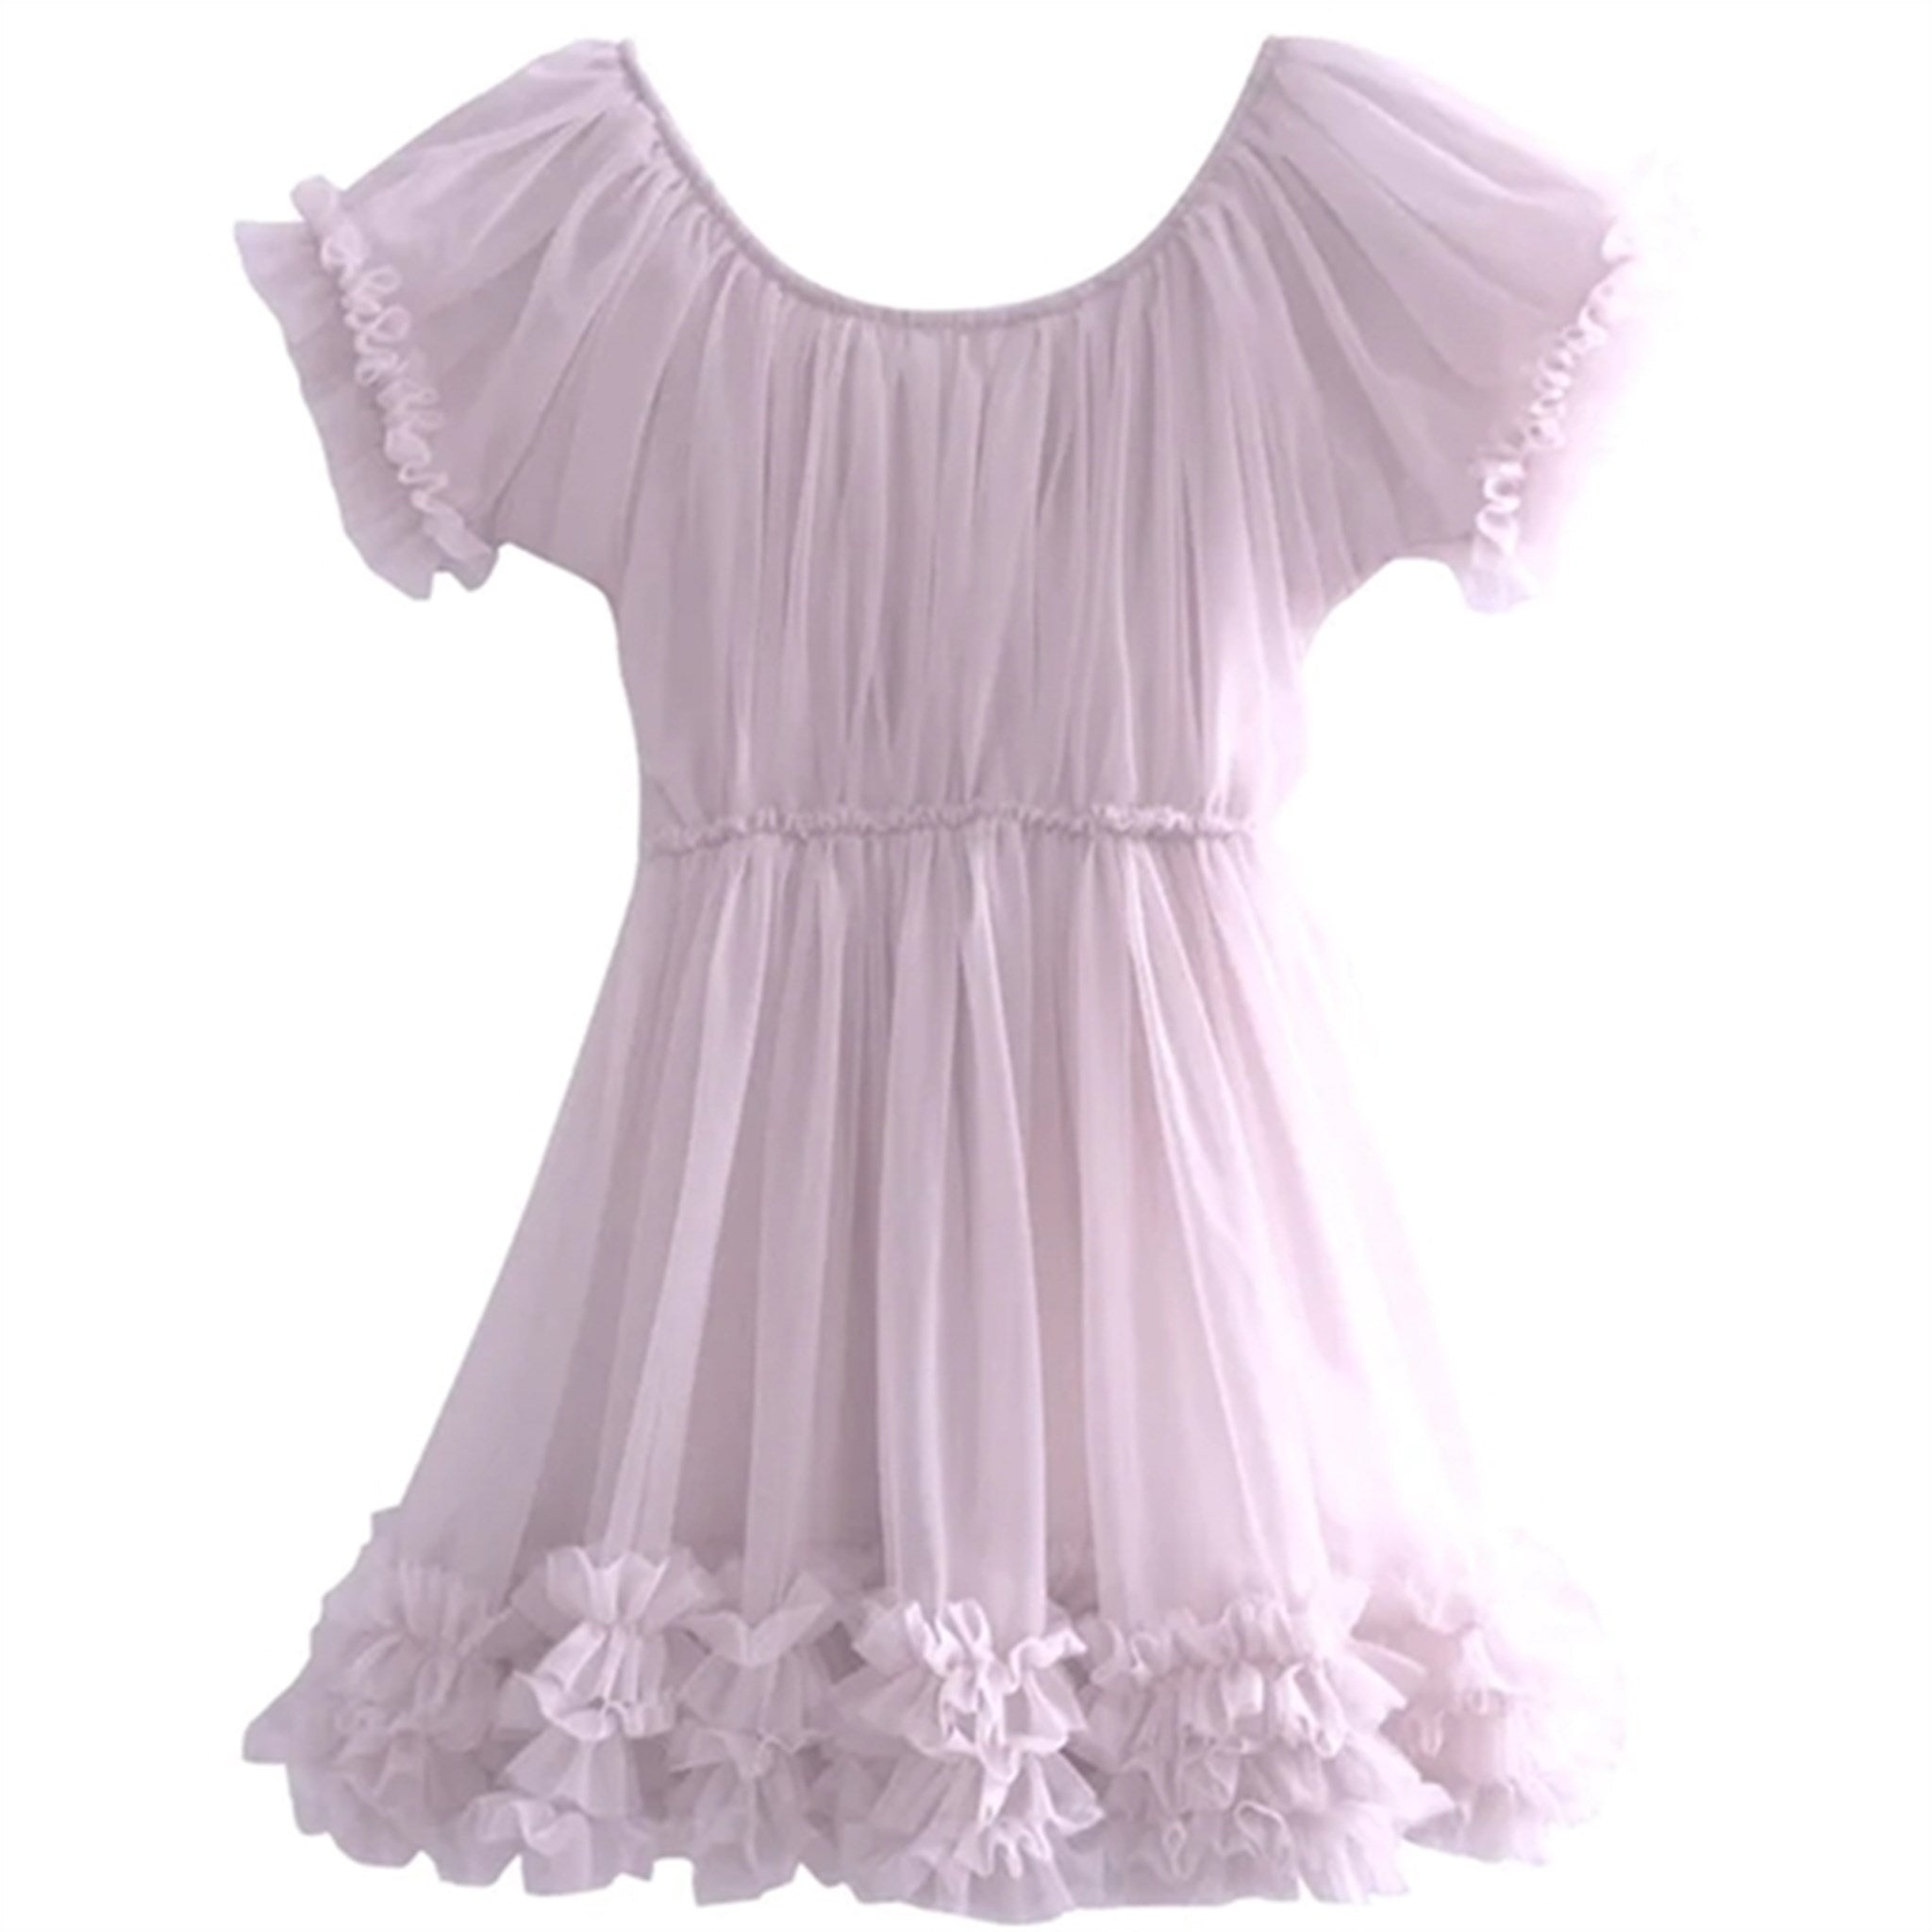 Dolly by Le Petit Frilly Dress Lavender